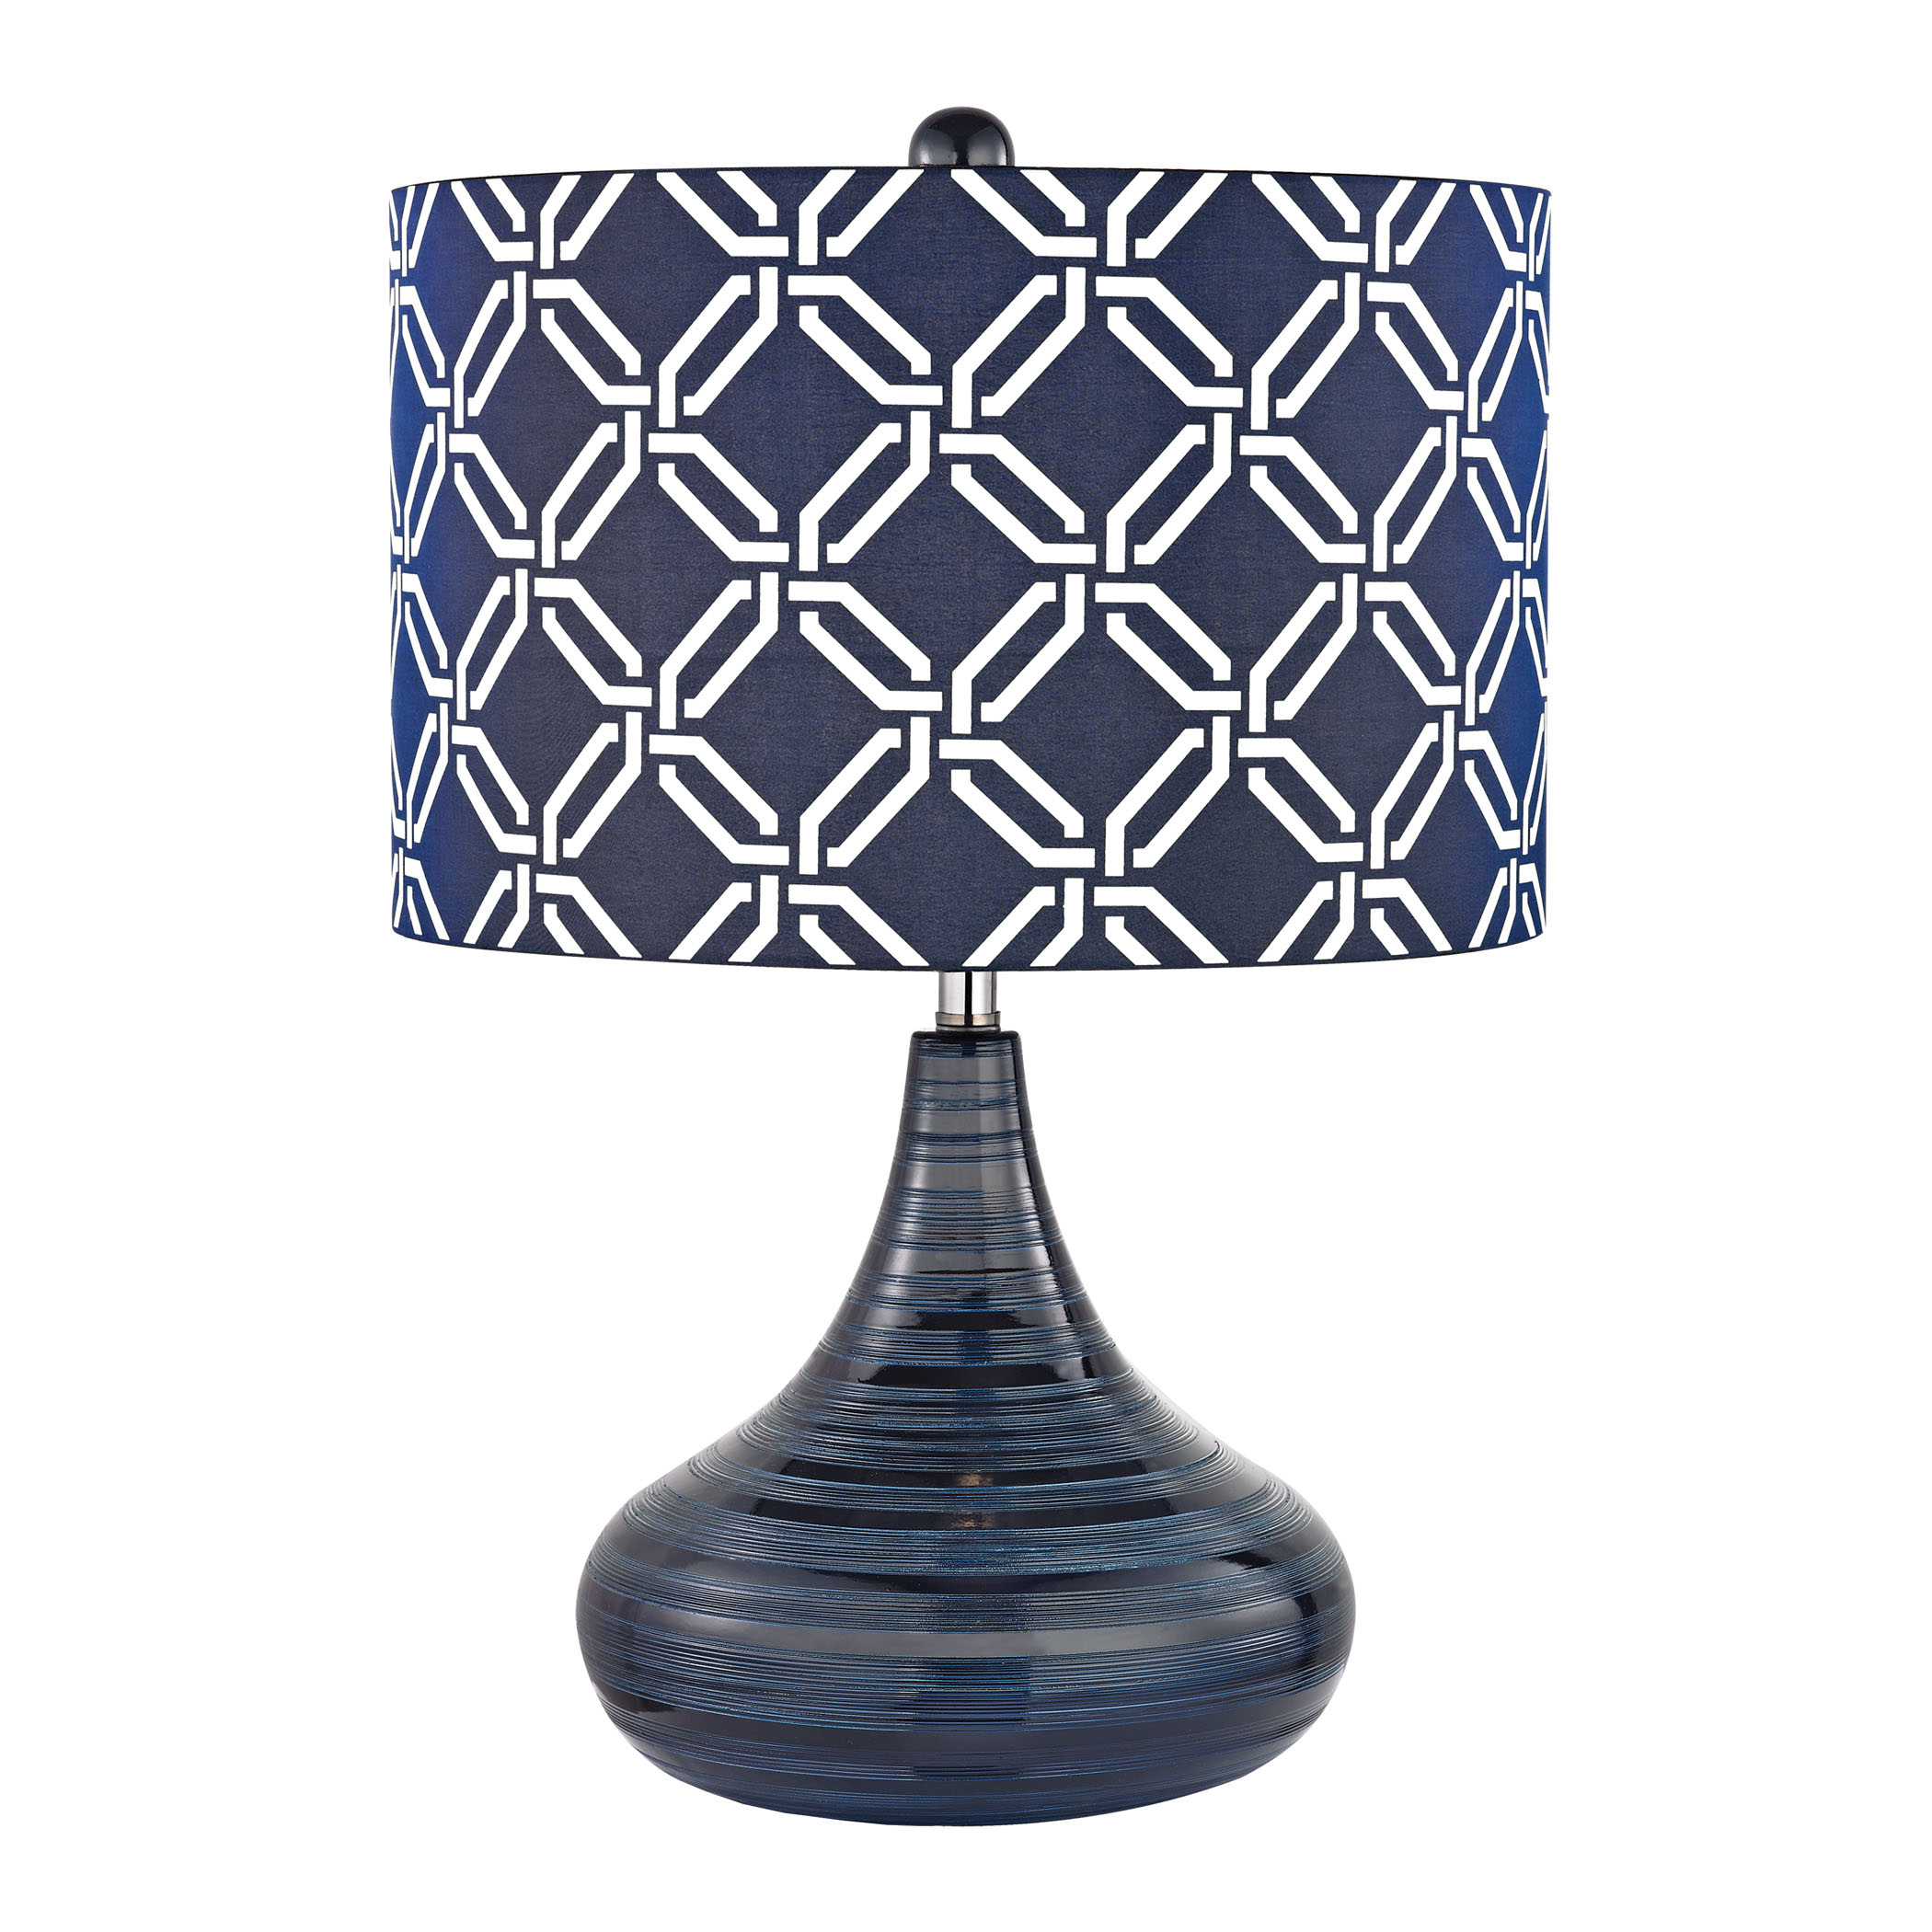 Choose navy blue table lamps if looking for beaty in your home